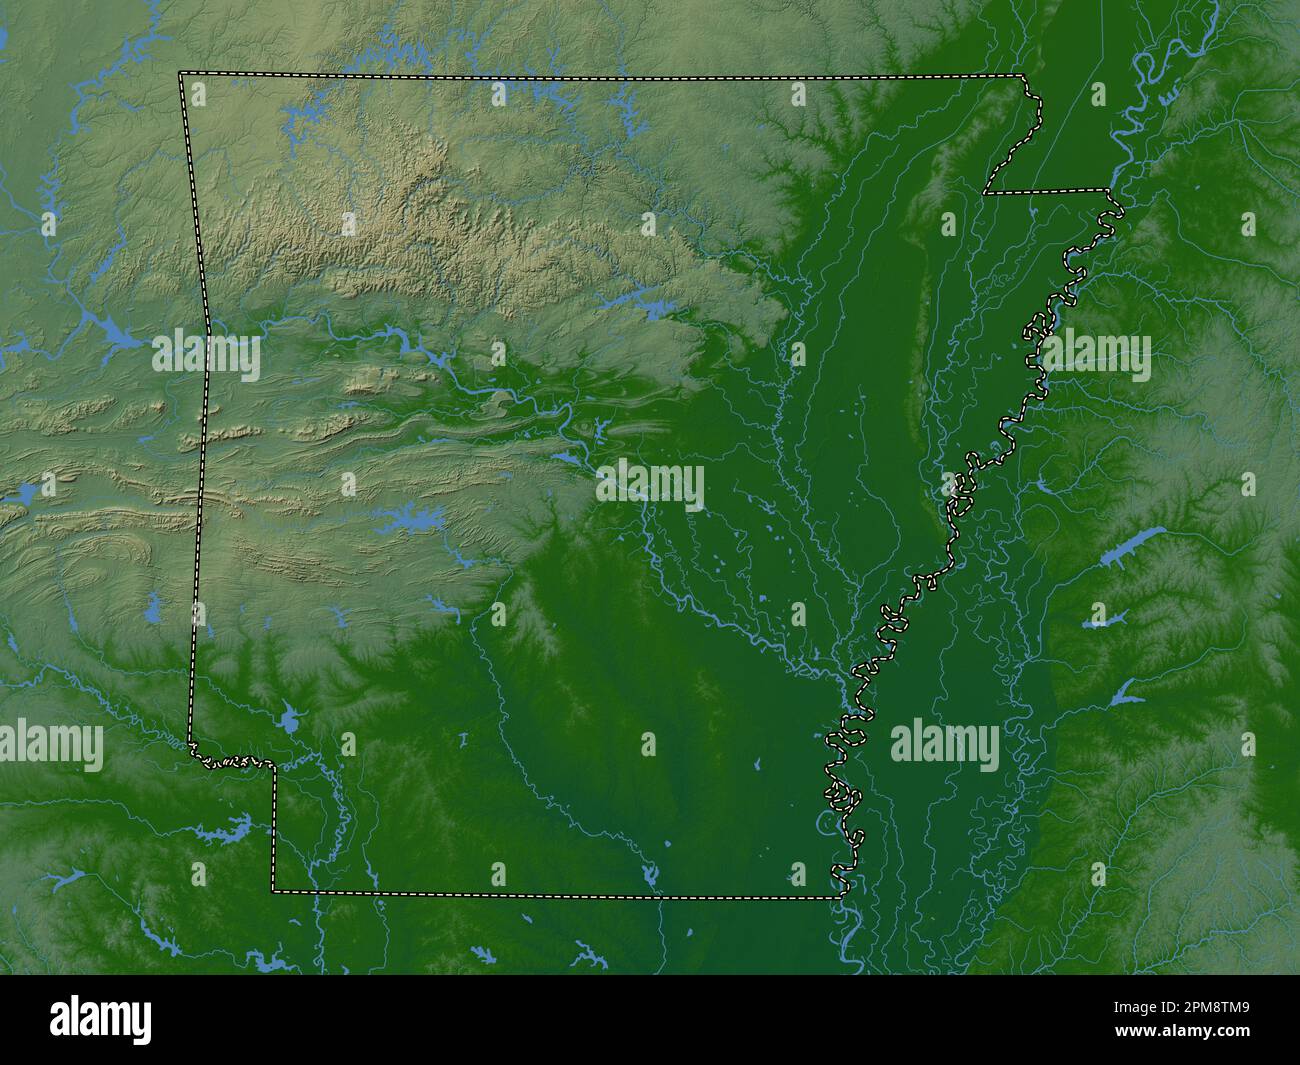 Arkansas, state of United States of America. Colored elevation map with lakes and rivers Stock Photo